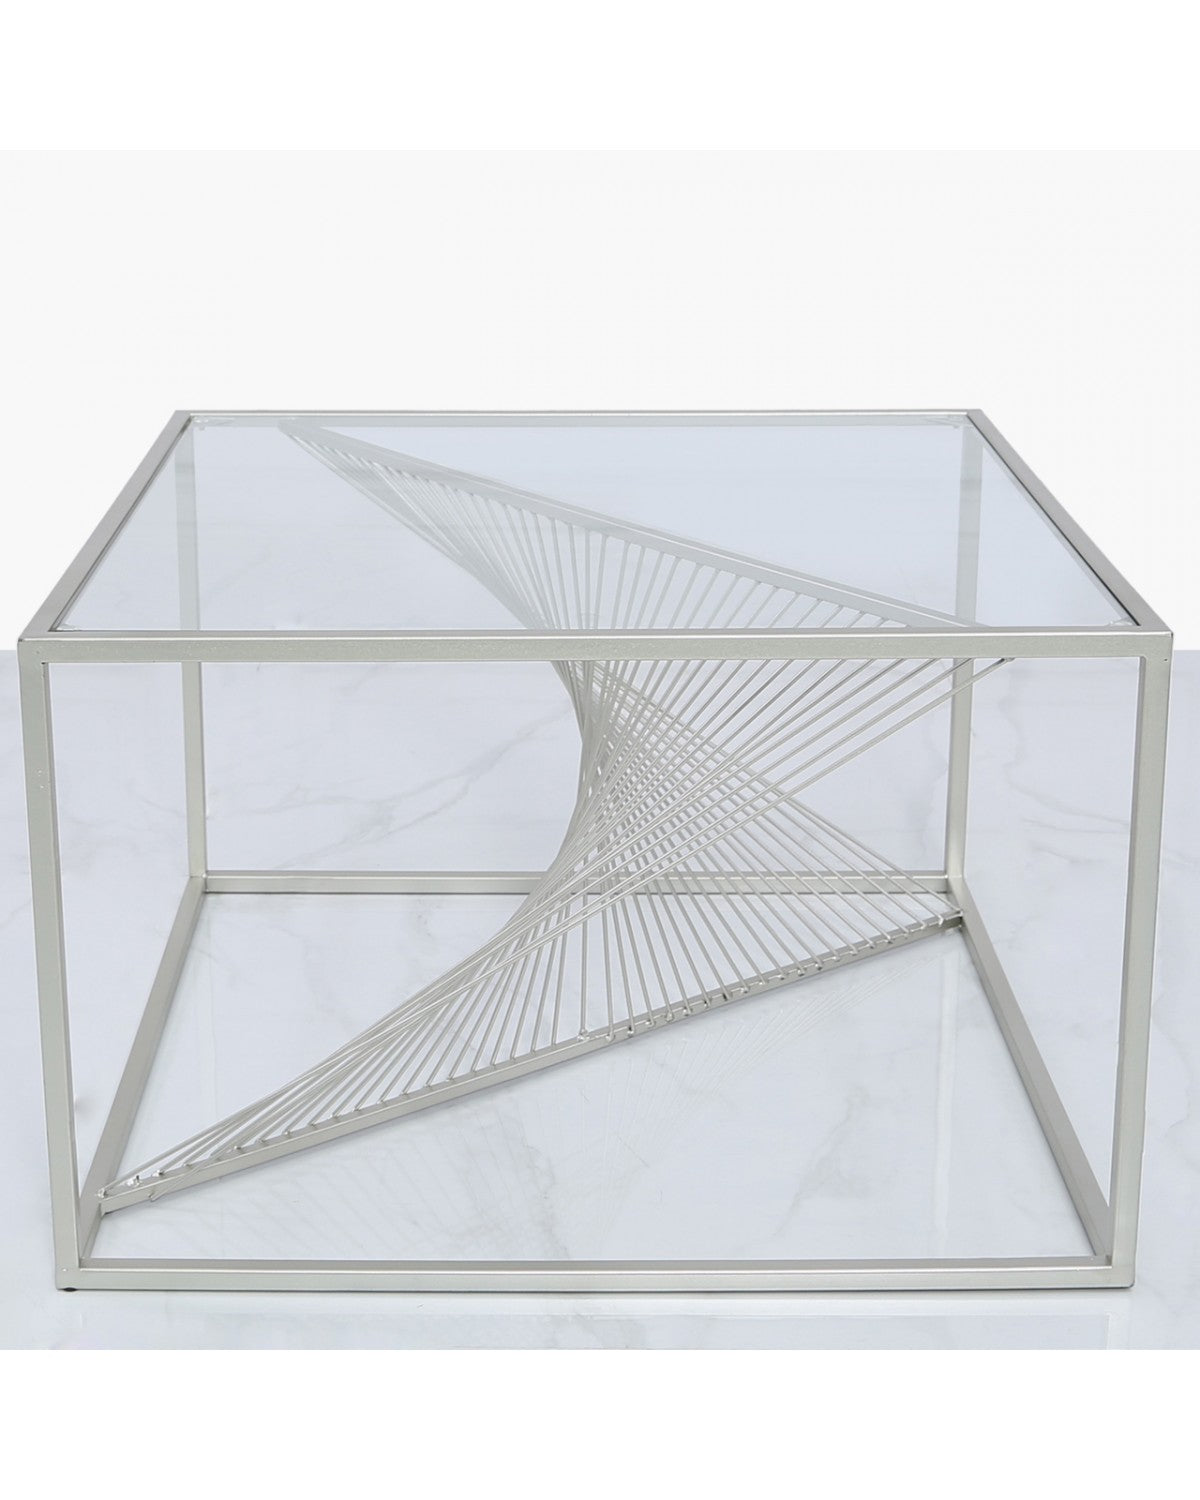 Deco Home Ava Silver Metal And Clear Glass Coffee Table With Unique Design